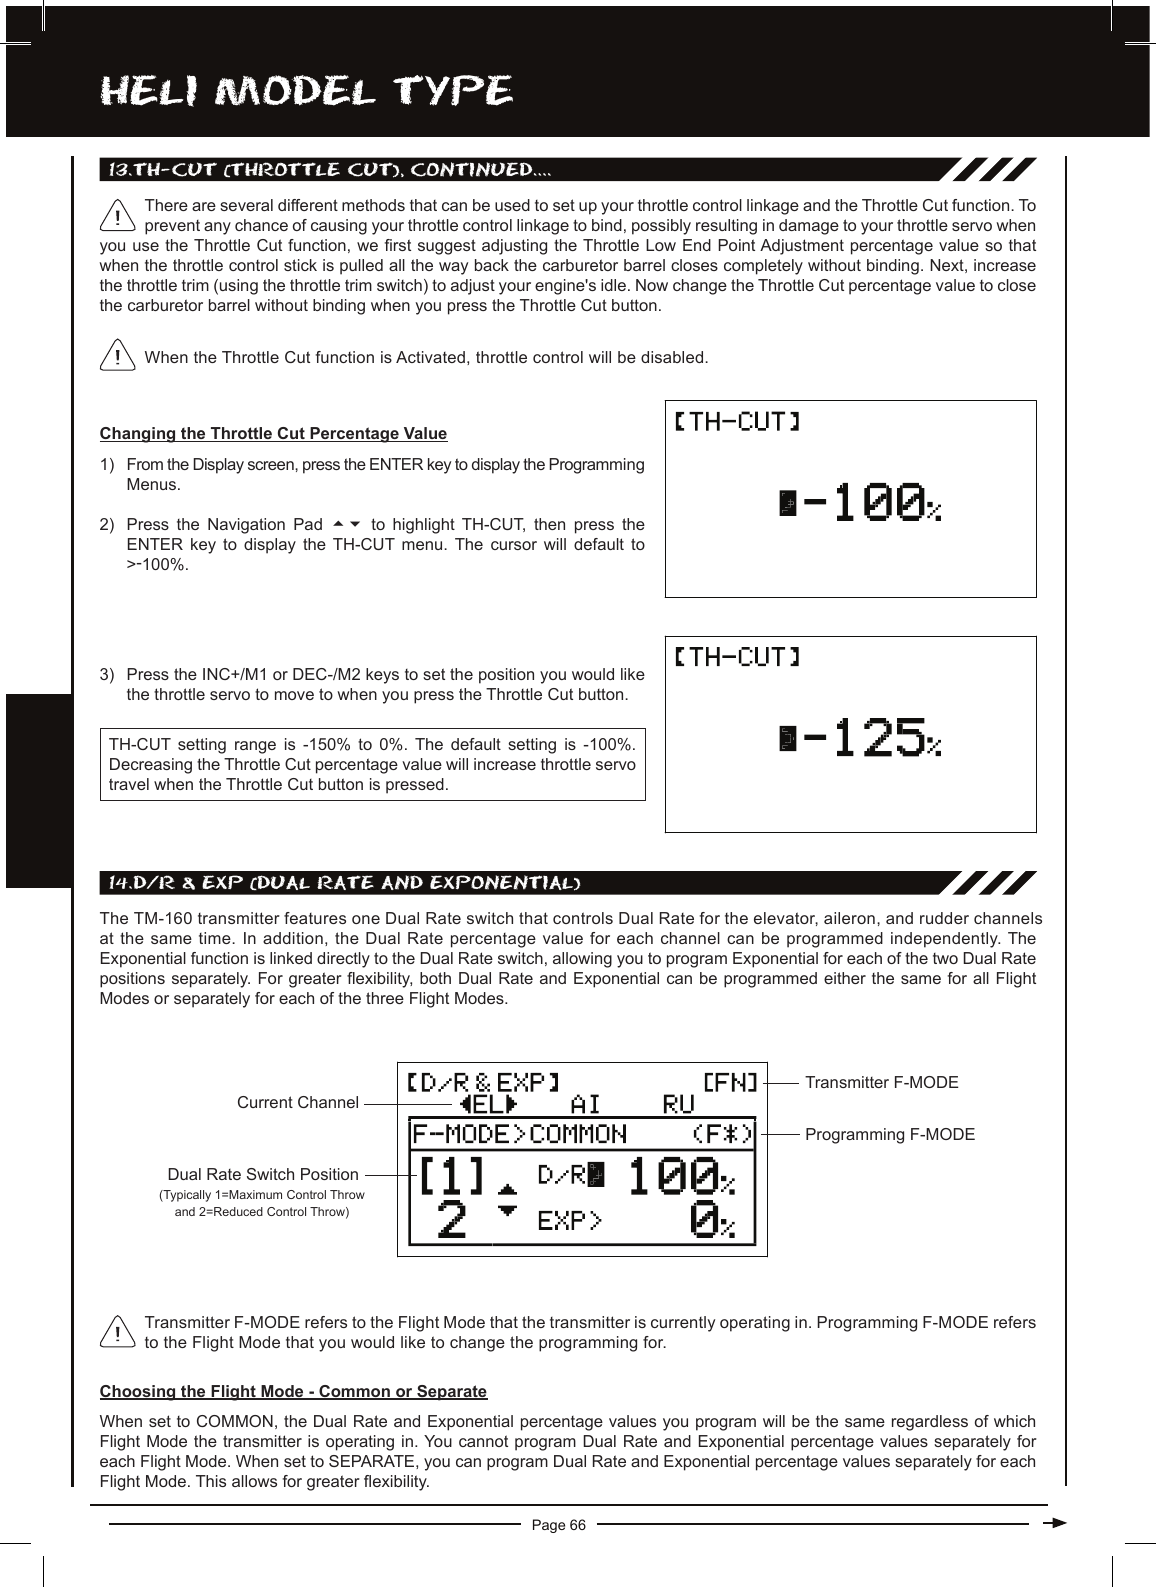 Page 66hELi MODEL TyPE14.D/R &amp; EXP (DUaL RaTE anD EXPOnEnTiaL)The TM-160 transmitter features one Dual Rate switch that controls Dual Rate for the elevator, aileron, and rudder channels at the same time. In addition, the Dual Rate percentage value for each channel can be programmed independently. The Exponential function is linked directly to the Dual Rate switch, allowing you to program Exponential for each of the two Dual Rate positions separately. For greater exibility, both Dual Rate and Exponential can be programmed either the same for all Flight Modes or separately for each of the three Flight Modes.Current ChannelTransmitter F-MODEProgramming F-MODETransmitter F-MODE refers to the Flight Mode that the transmitter is currently operating in. Programming F-MODE refers to the Flight Mode that you would like to change the programming for.Choosing the Flight Mode - Common or SeparateWhen set to COMMON, the Dual Rate and Exponential percentage values you program will be the same regardless of which Flight Mode the transmitter is operating in. You cannot program Dual Rate and Exponential percentage values separately for each Flight Mode. When set to SEPARATE, you can program Dual Rate and Exponential percentage values separately for each Flight Mode. This allows for greater exibility.13.Th-cUT (ThROTTLE cUT), cOnTinUED....Changing the Throttle Cut Percentage Value1) From the Display screen, press the ENTER key to display the Programming Menus.2) Press  the  Navigation  Pad  56 to  highlight  TH-CUT,  then  press  the ENTER  key  to  display  the  TH-CUT menu.  The  cursor  will  default  to &gt;-100%.When the Throttle Cut function is Activated, throttle control will be disabled.There are several different methods that can be used to set up your throttle control linkage and the Throttle Cut function. To prevent any chance of causing your throttle control linkage to bind, possibly resulting in damage to your throttle servo when you use the Throttle Cut function, we rst suggest adjusting the Throttle Low End Point Adjustment percentage value so that when the throttle control stick is pulled all the way back the carburetor barrel closes completely without binding. Next, increase the throttle trim (using the throttle trim switch) to adjust your engine&apos;s idle. Now change the Throttle Cut percentage value to close the carburetor barrel without binding when you press the Throttle Cut button.TH-CUT setting  range  is  -150%  to  0%.  The  default  setting  is  -100%. Decreasing the Throttle Cut percentage value will increase throttle servo travel when the Throttle Cut button is pressed.3) Press the INC+/M1 or DEC-/M2 keys to set the position you would like the throttle servo to move to when you press the Throttle Cut button.Dual Rate Switch Position (Typically 1=Maximum Control Throw and 2=Reduced Control Throw)